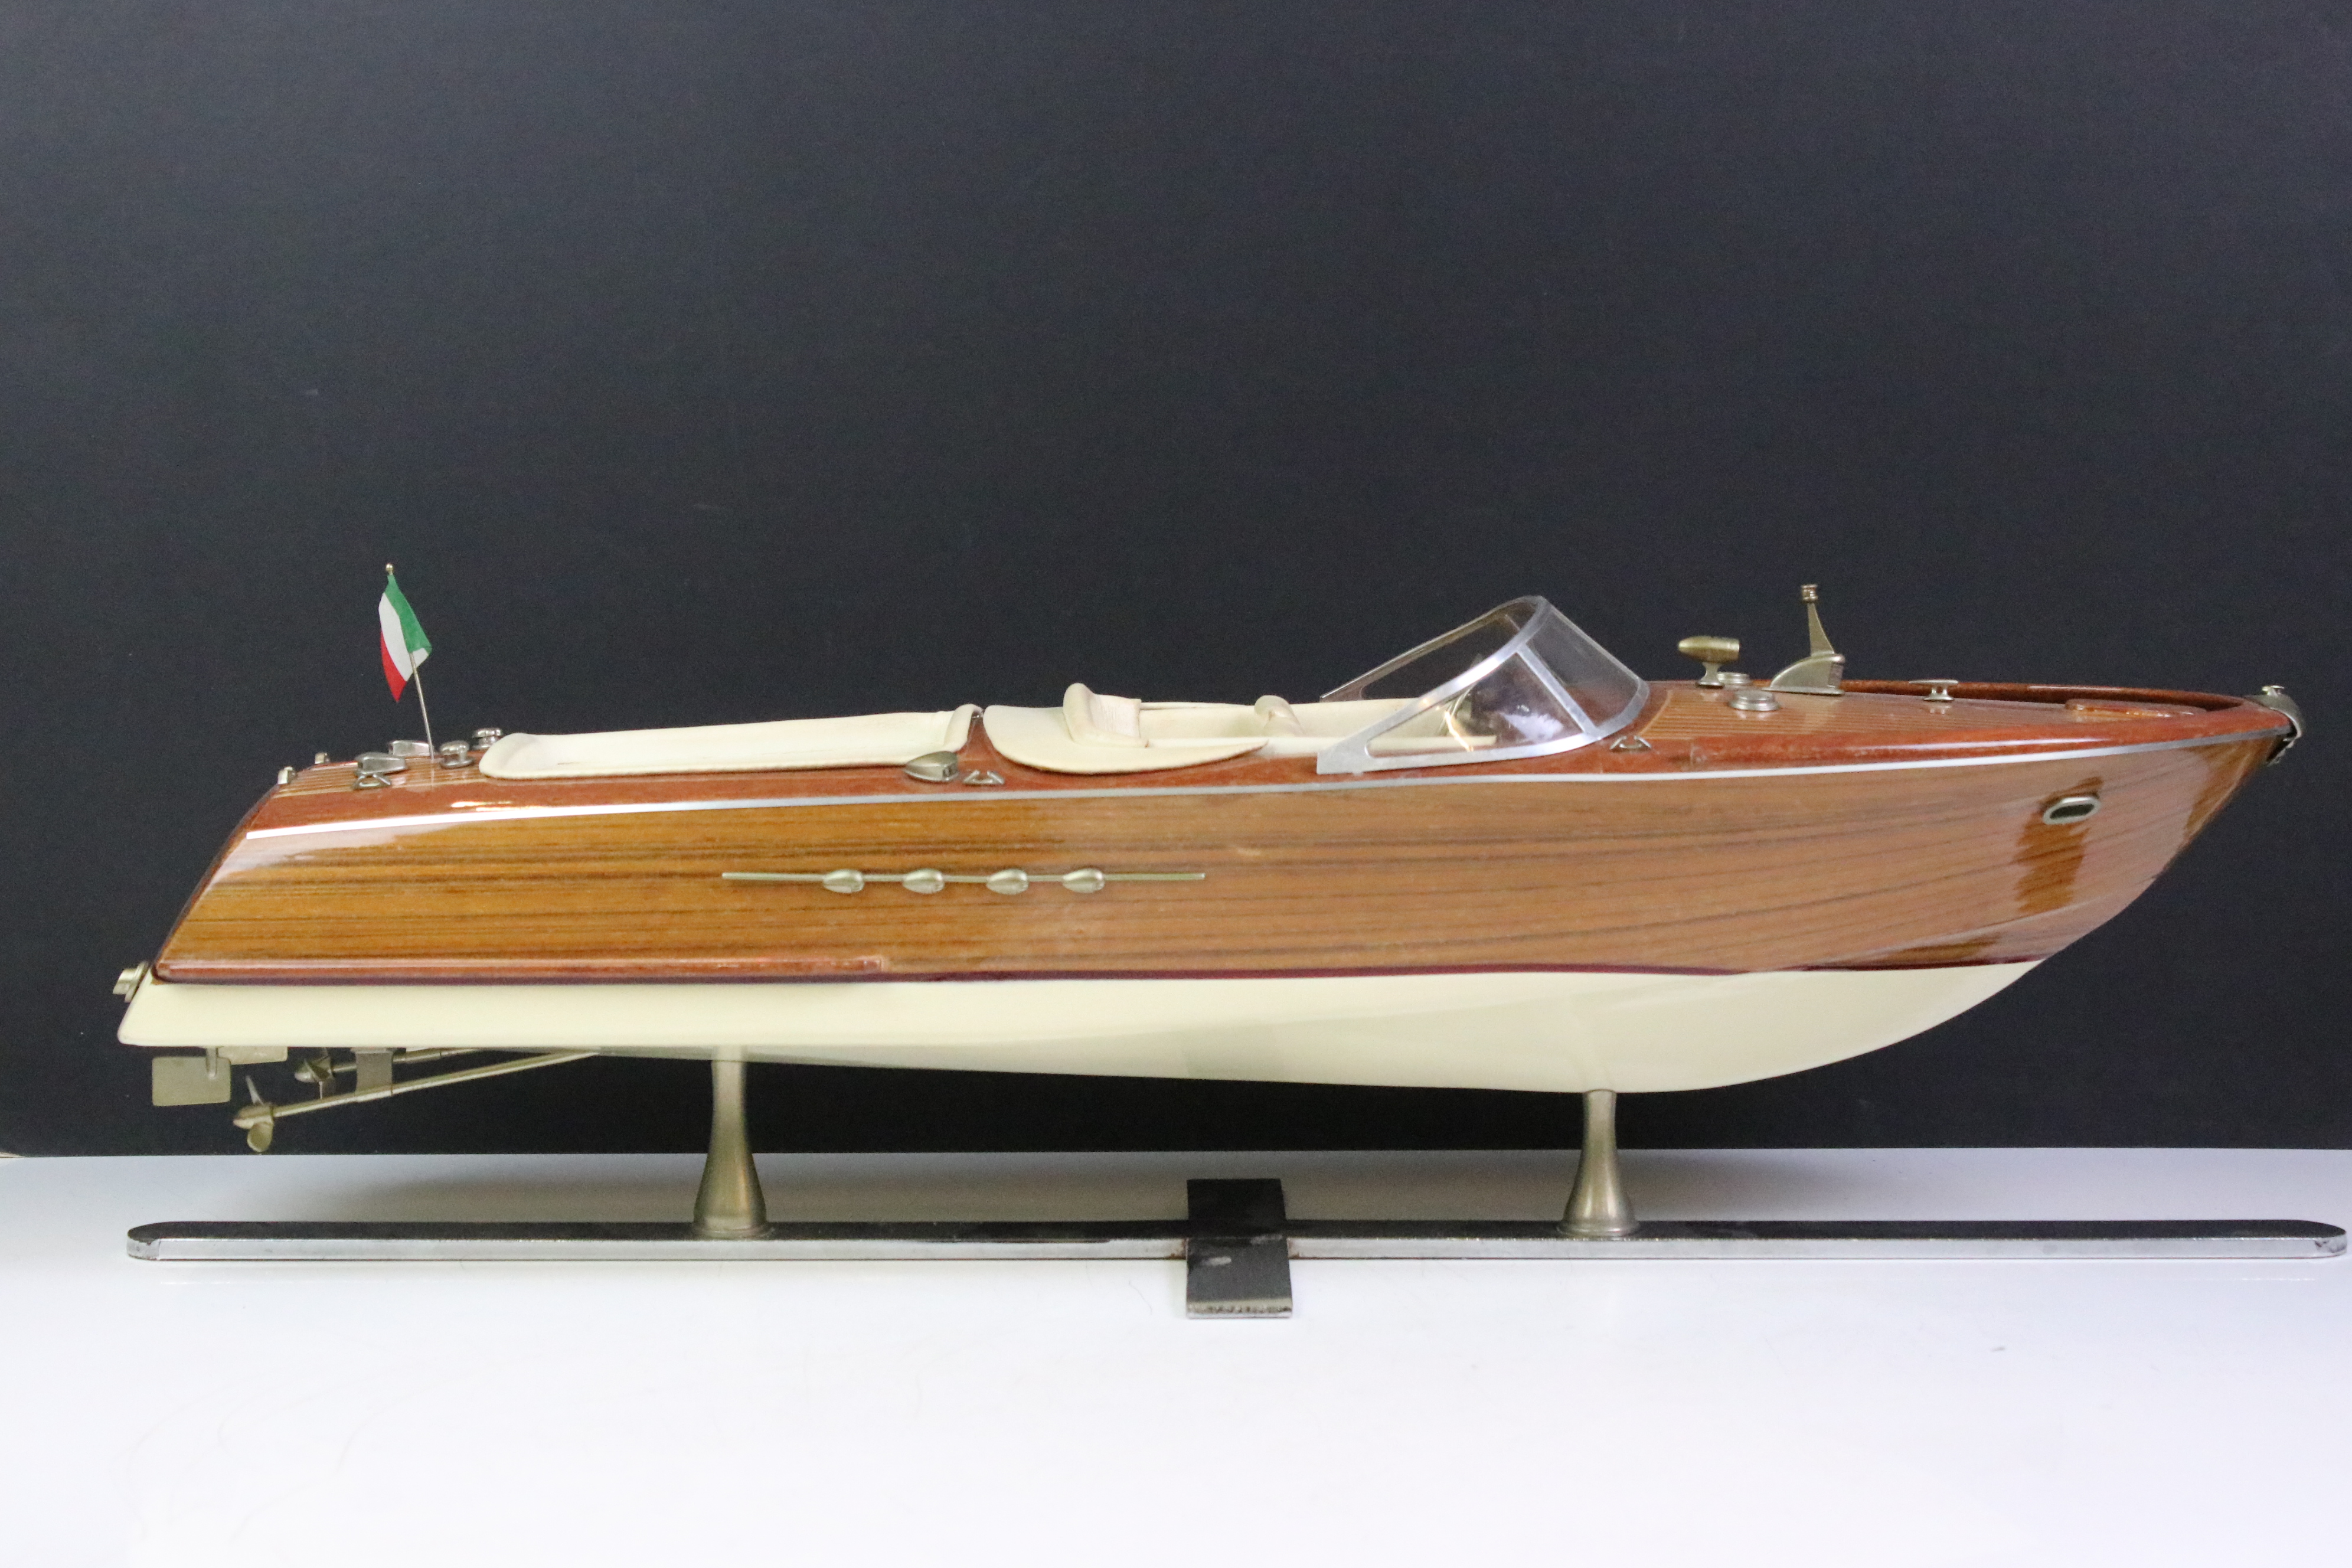 Authentic Models AM Aquarama Italian runabout model boat, on stand, 26" in length - Image 3 of 9